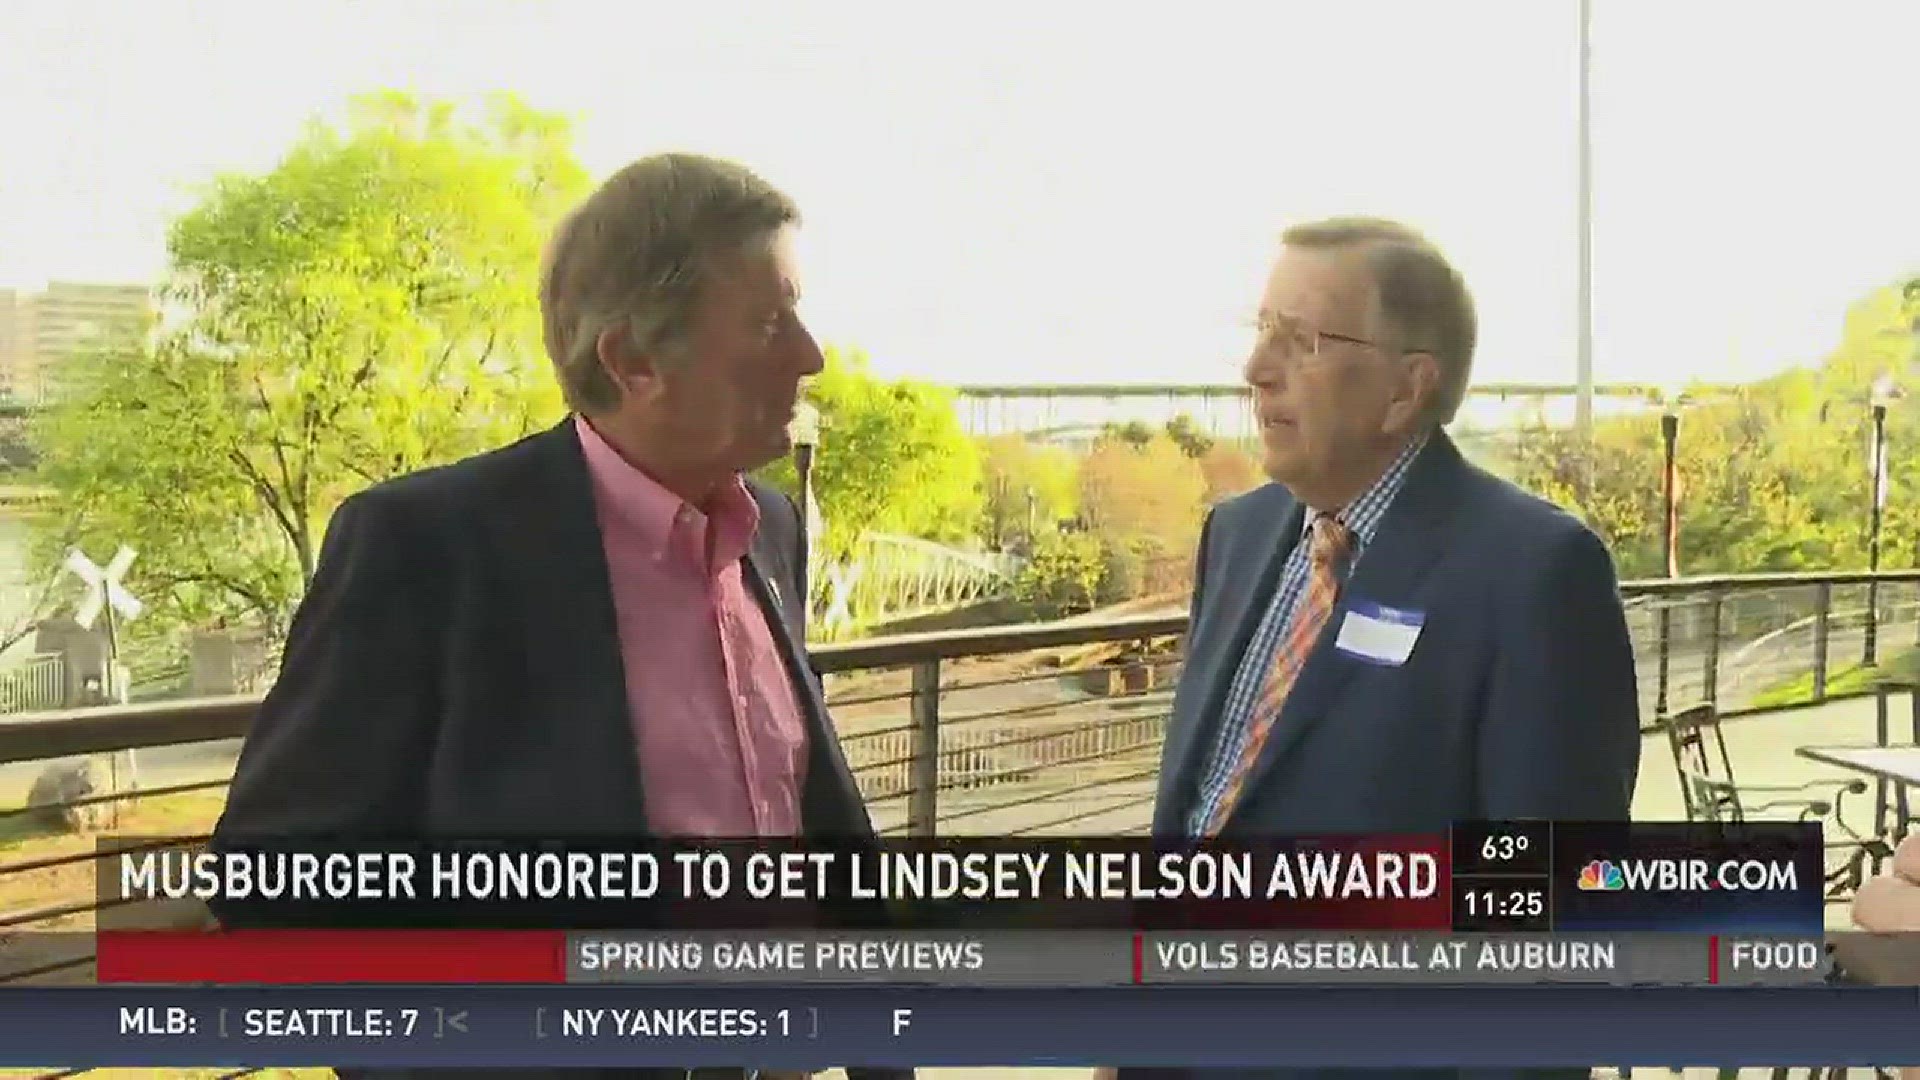 Steve Spurrier in Knoxville to accept Neyland Trophy